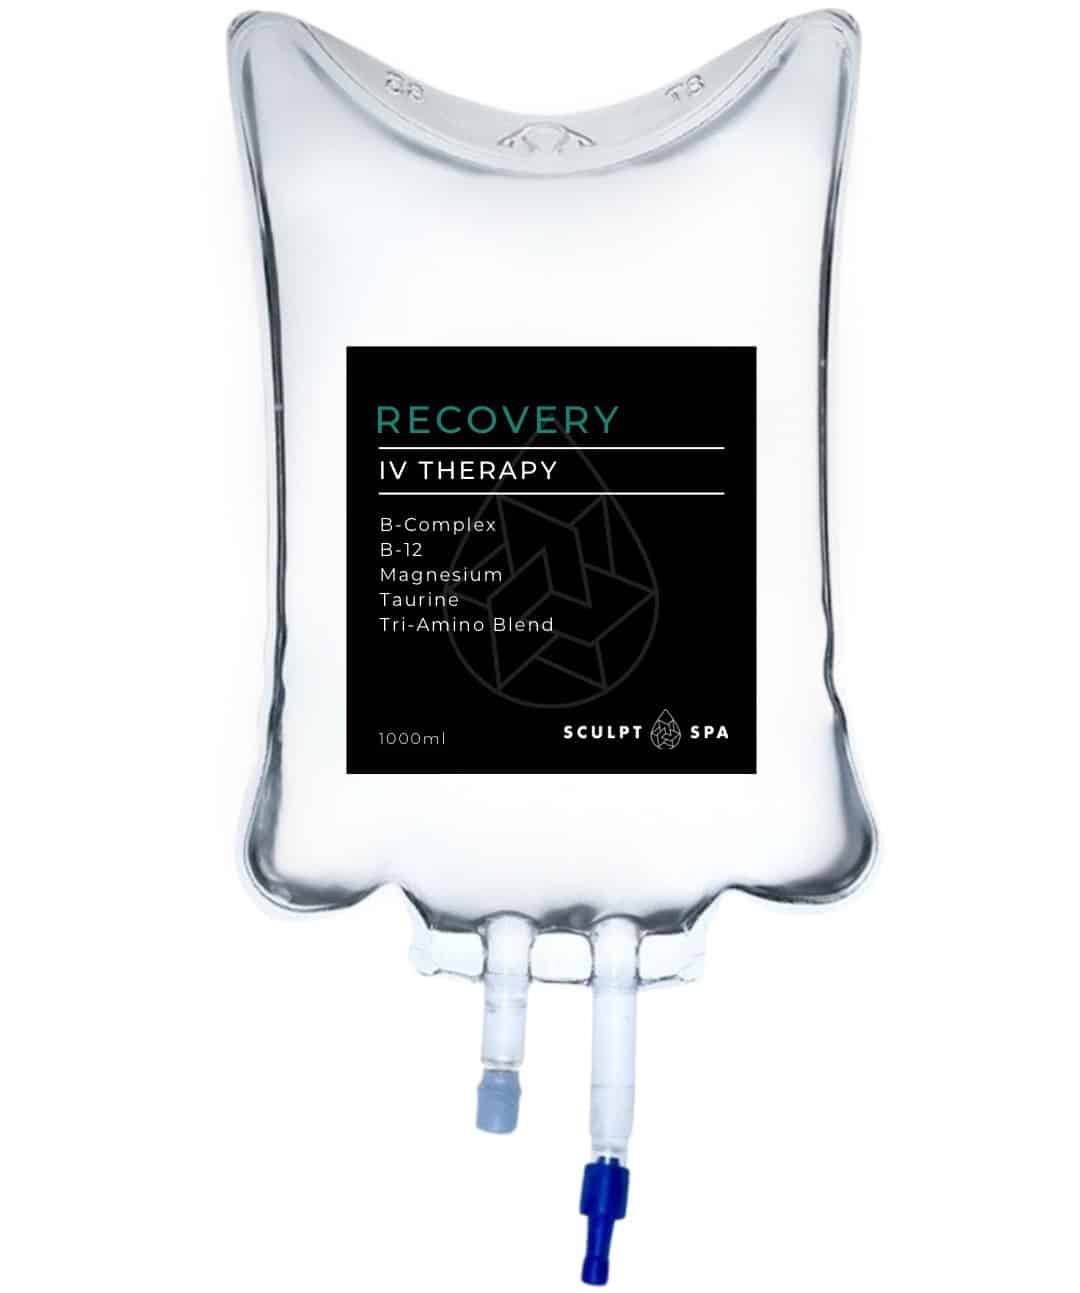 Sculpt Spa - Recovery IV Therapy